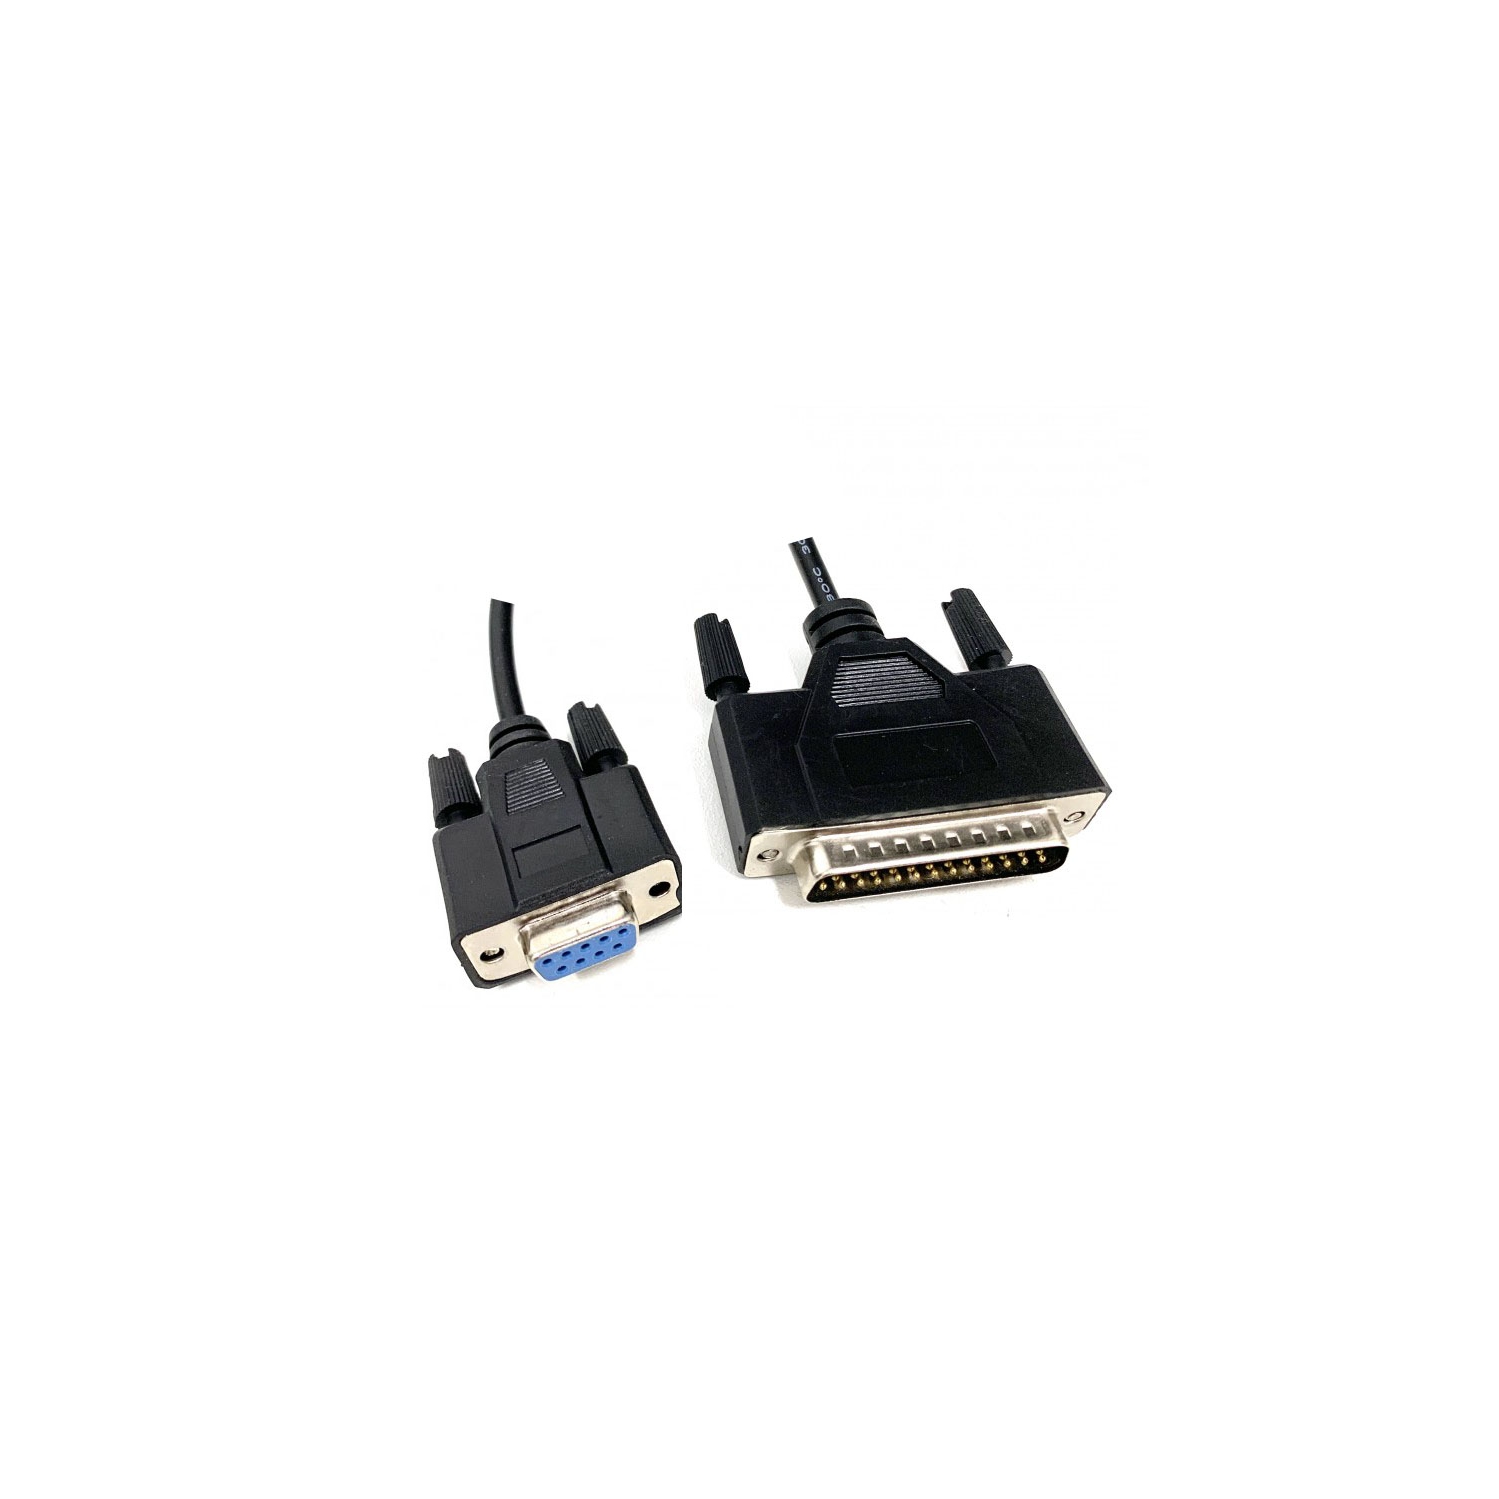 Free Shipping! HYFAI DB9 Female to DB25 Male Null-Modem Serial Port Com RS232 Cable Cord - 6 ft